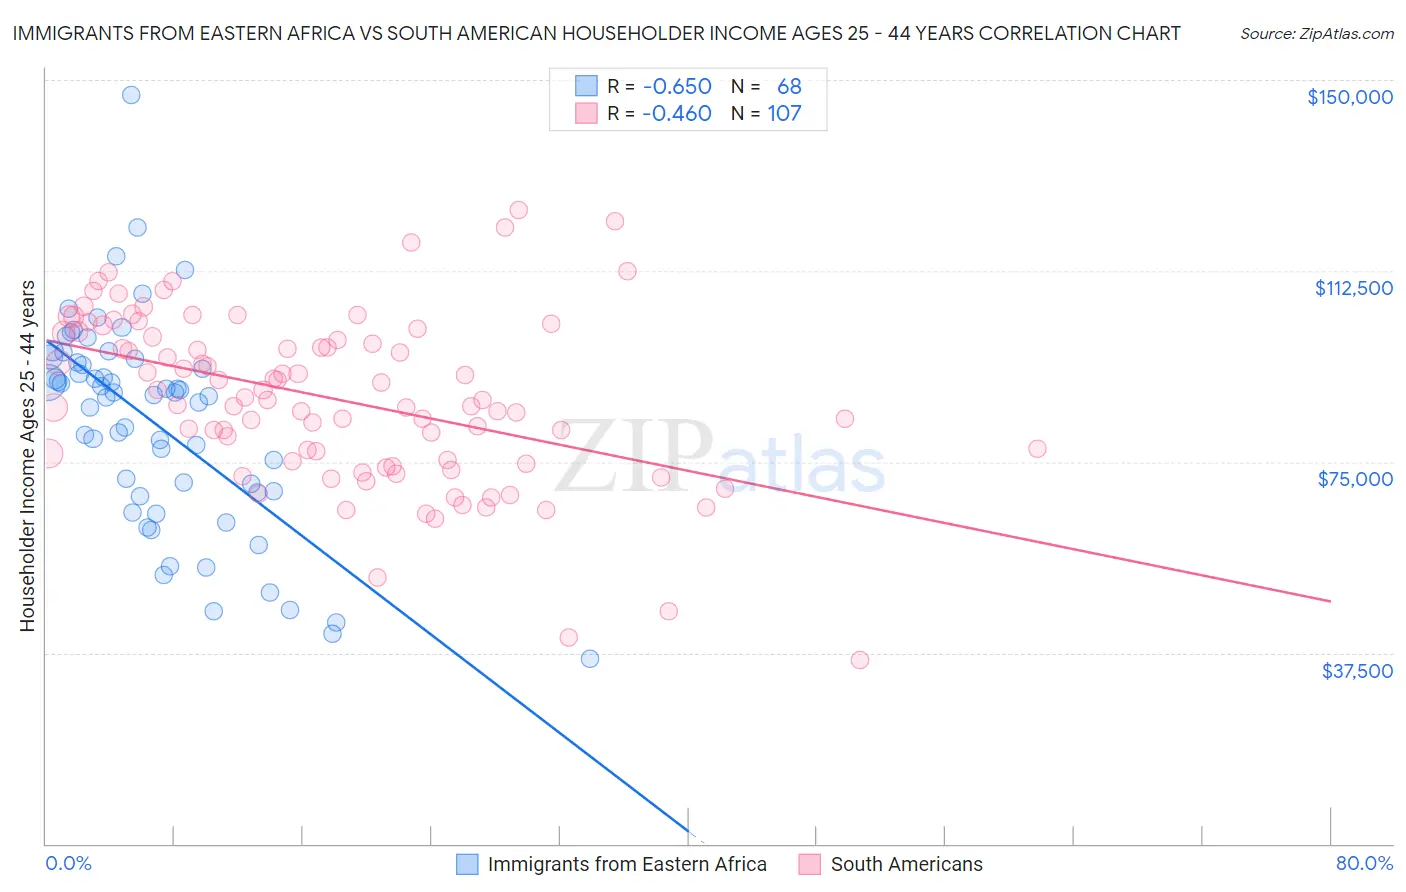 Immigrants from Eastern Africa vs South American Householder Income Ages 25 - 44 years